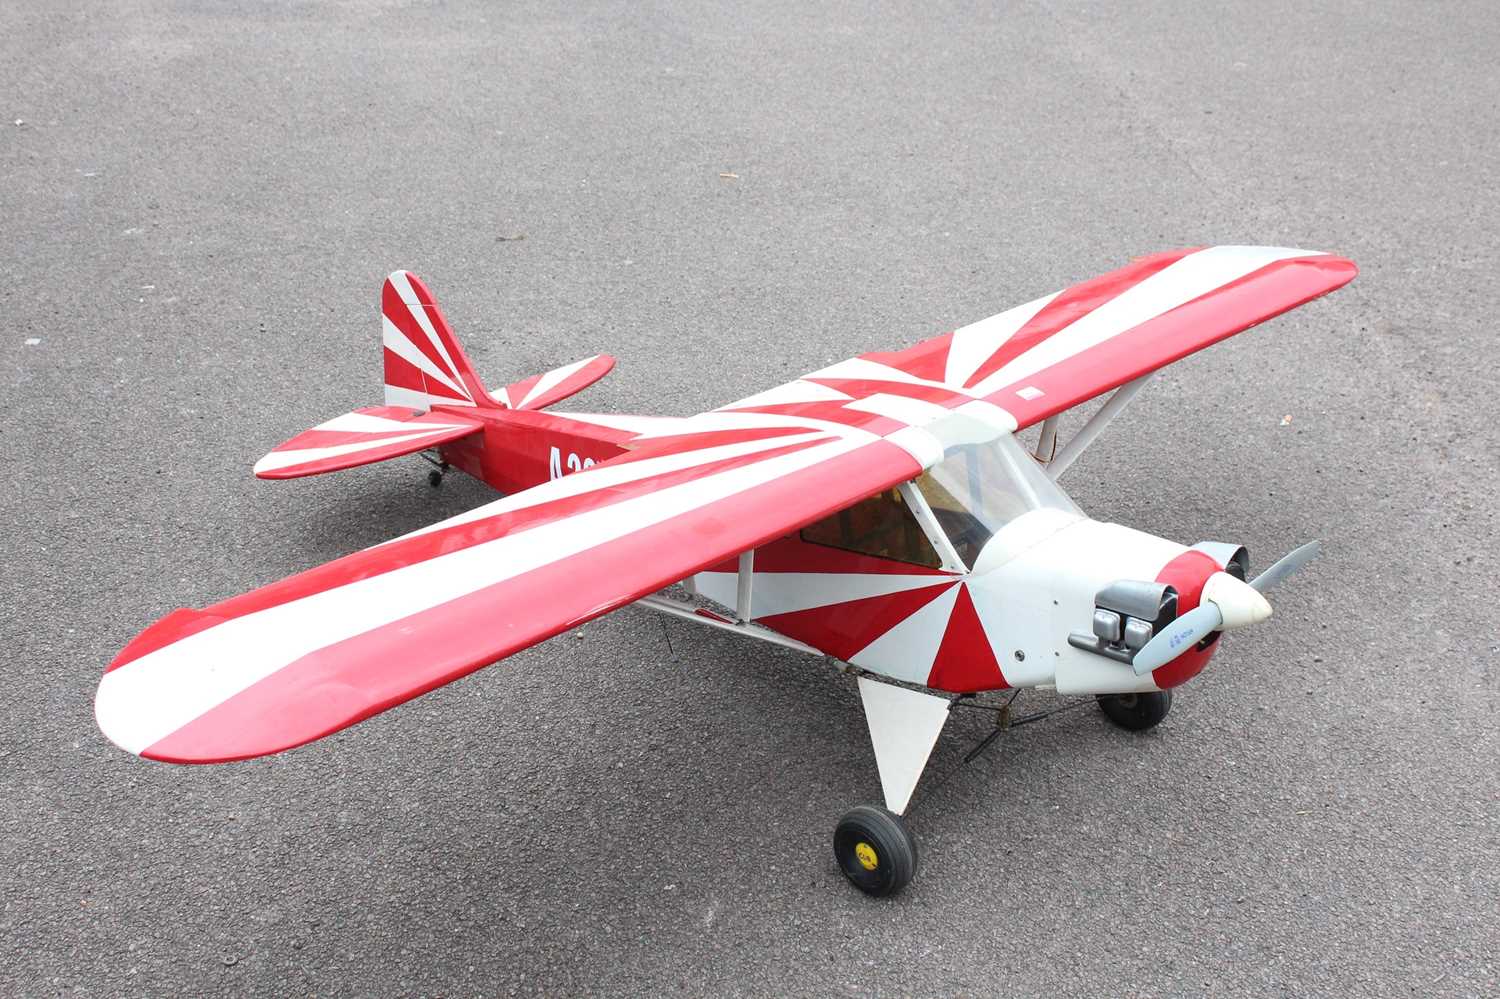 A very well made kit-built radio controlled and four stoke model aircraft, constructed from balsa